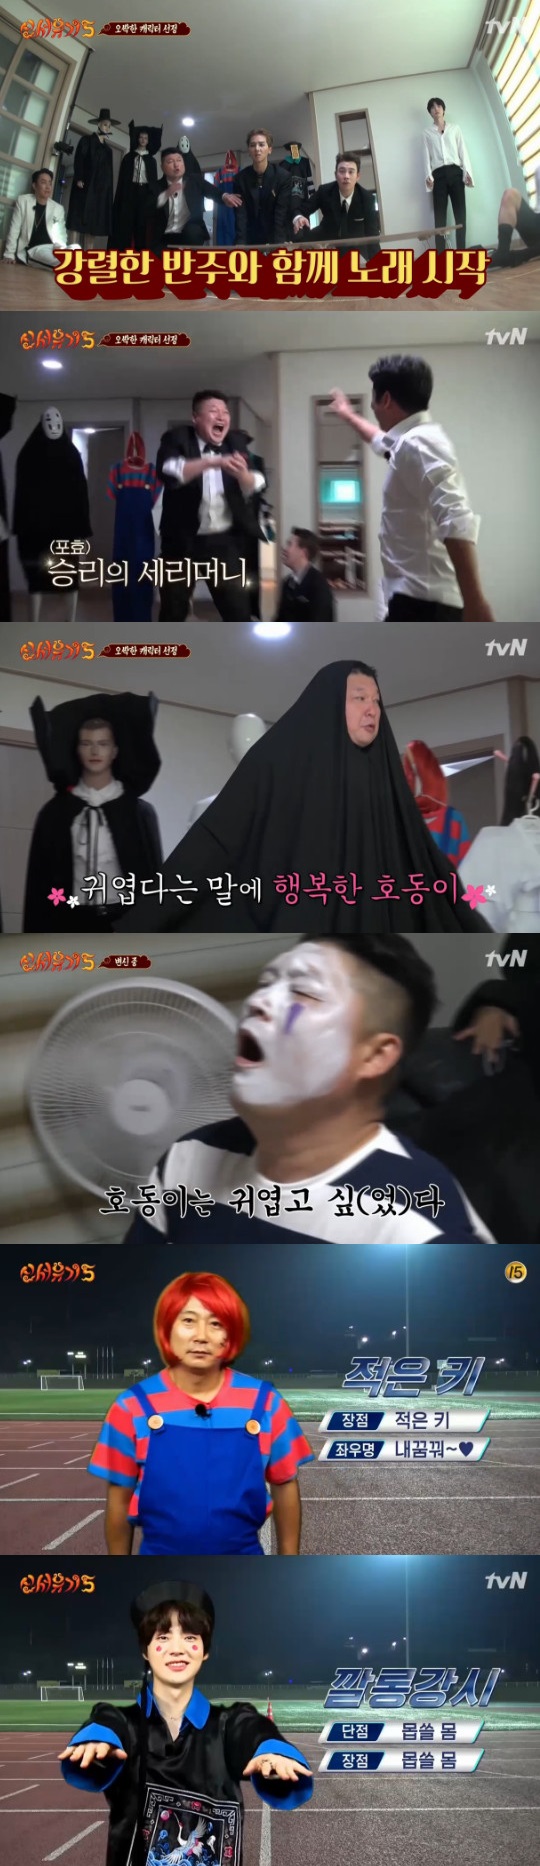 Members of Shin Seo Yugi 5 have turned into ghost characters.On the 30th night, cable TVN entertainment program Shin Seo Yugi Season 5 started a special feature Korea, Kong and Japan connecting Korea, Hong Kong and Japan.On this day, the members gathered at a pension in Gapyeong, Gyeonggi Province and started season 5 by choosing characters.Kaonashi, Chucky and other ghost character costumes, Korean entertainment comprehensive evaluation game was held.The first was Game, which was a hit song from the past and hit the title with the singer; Eun Ji-won didnt know about the buzzer problem, but he got the chance to copy the answer from Ahn Jae-hyun.After all, Eun Ji-won, who was the fastest to answer, chose the lion costume.The second problem was that TWICEs song was played: Song Min-ho and P.O. knew the correct answer, but they could not answer it because they did not know the buzzer problem of asking the person who made the Daedongyeojido.Lee Soo-geun, who did not know the song but knew the buzzer problem, eventually took the Chucky costume by hitting TWICEs Knock Knock.The third issue was the group Koyotaes Vimong.However, Kang Ho-dong, Ahn Jae-hyun, P.O, and Song Min-ho did not know the title of the song at all, and made the surrounding laughing sea with numerous misrepresentations such as misery, fuss, trials, magnolia, and A branch.Song Min-ho, who shouted several misrepresentations, opted for a maiden ghost costume.Kang Ho-dong, who faced the fourth problem, chose Gaonashi, who everyone avoided because of the makeup that covered the entire face.Gangshi was the P.O.s charge of Ahn Jae-hyun and Dracula.This brought together members who had dressed up as their own characters: Lee Soo-geun said, Dont say were going to die hard in the middle because were already ghosts.We are already dead, he said, asking the members to raise expectations for a comic trip.